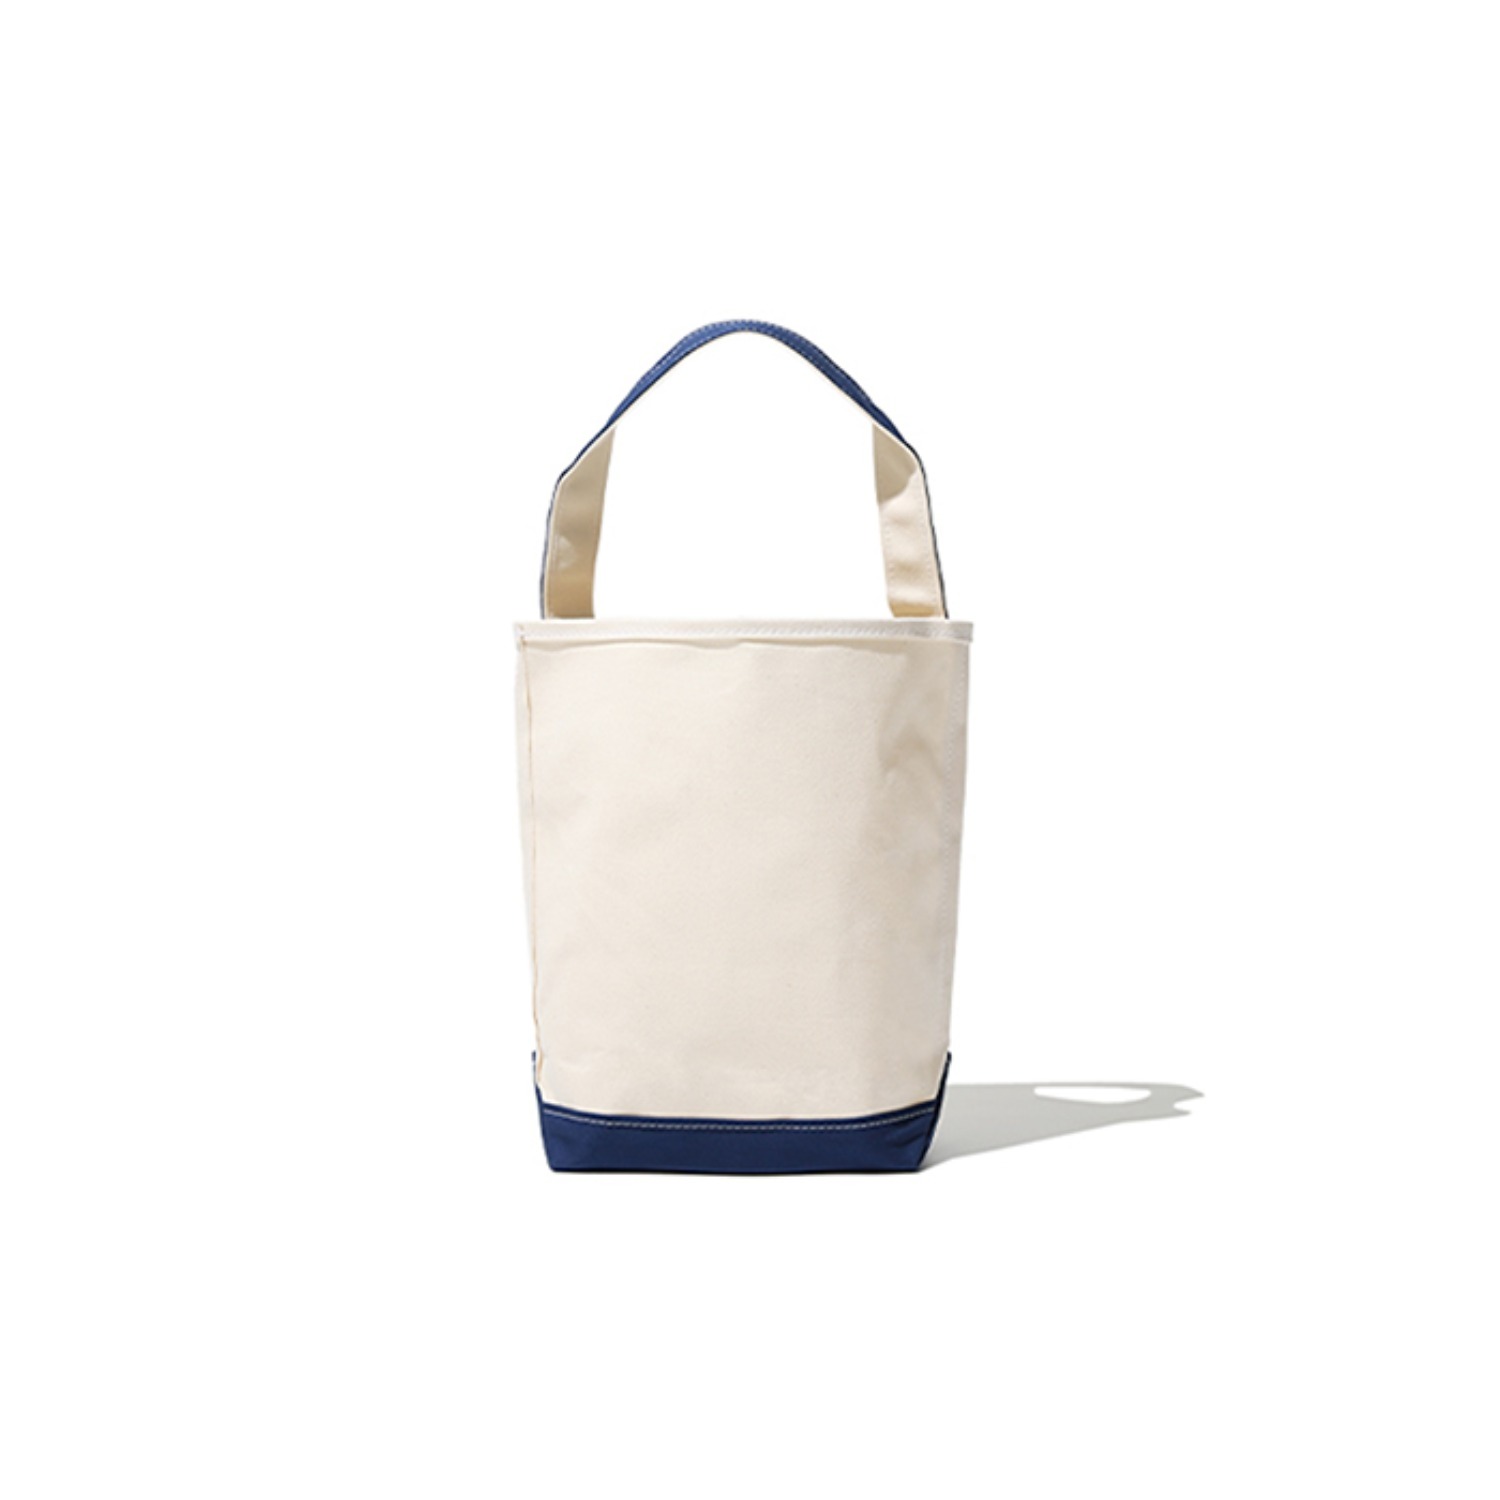 baguette tote small natural/navy